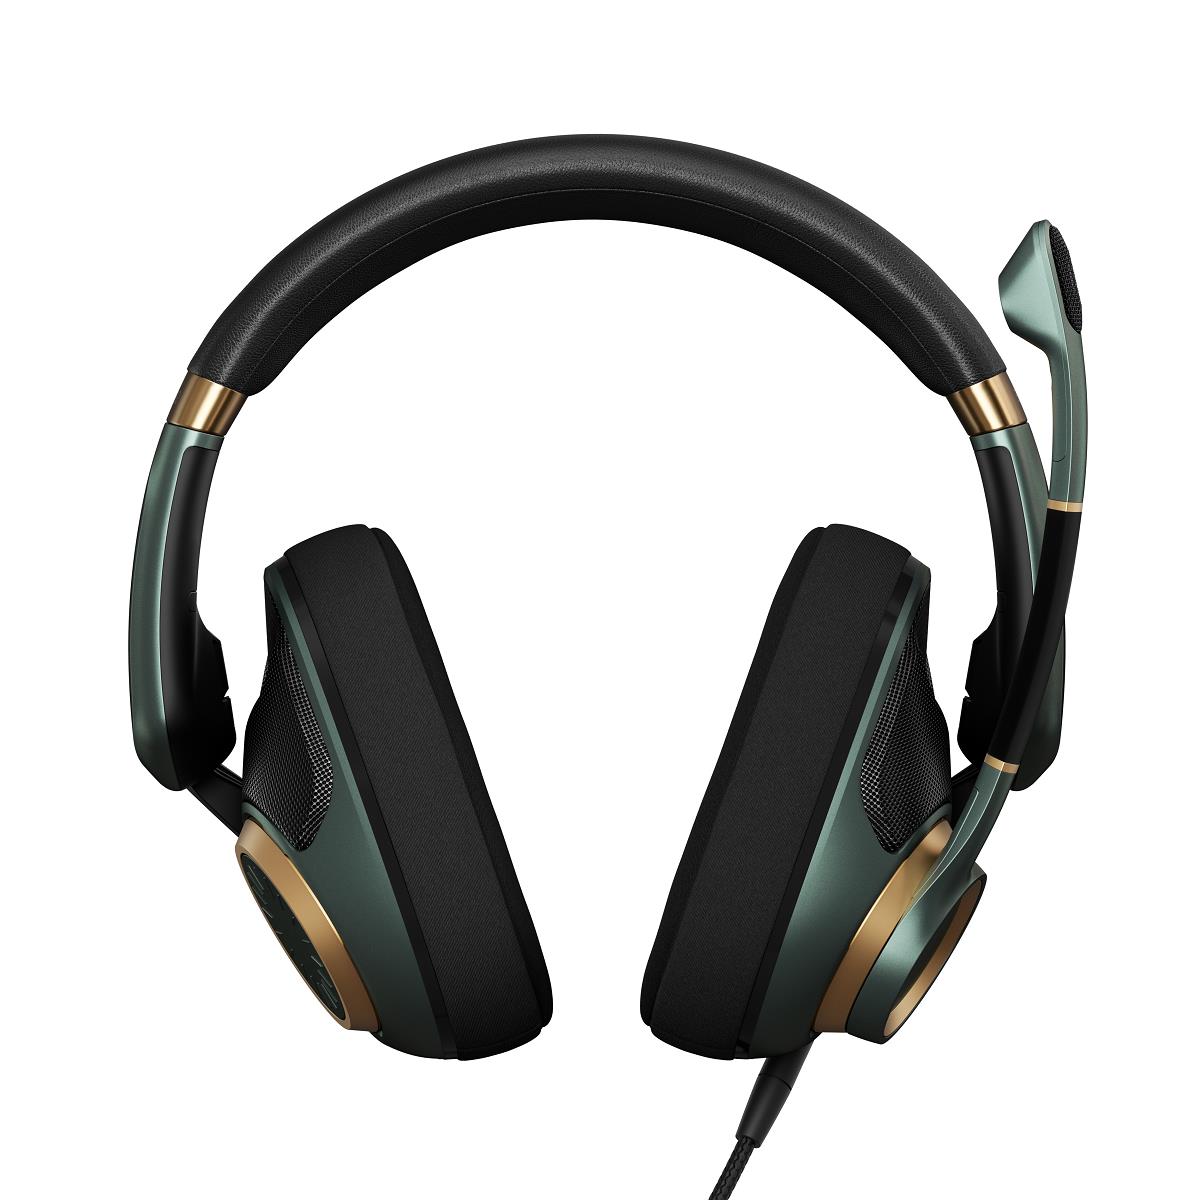 EPOS Audio H6PRO Open Acoustic Gaming Headset (Racing Green) - image 3 of 8